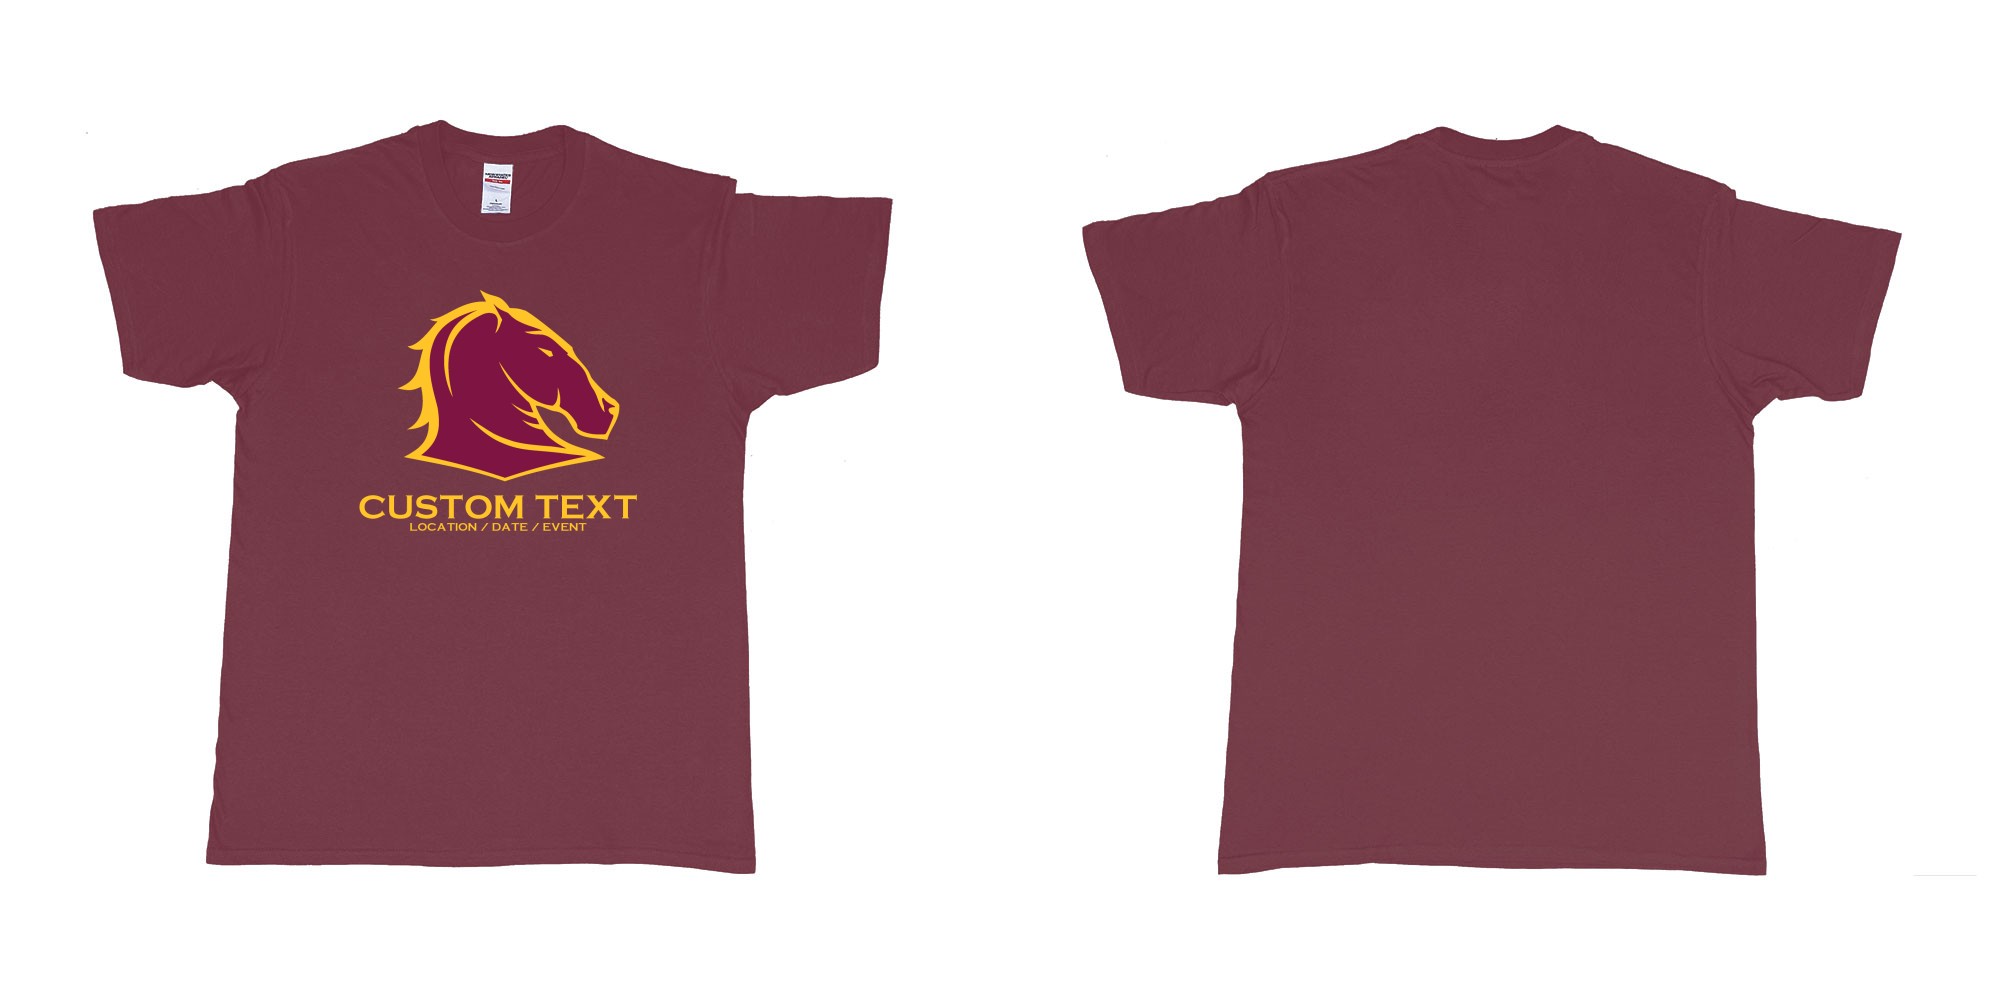 Custom tshirt design brisbane broncos australian professional rugby league football club queensland in fabric color marron choice your own text made in Bali by The Pirate Way